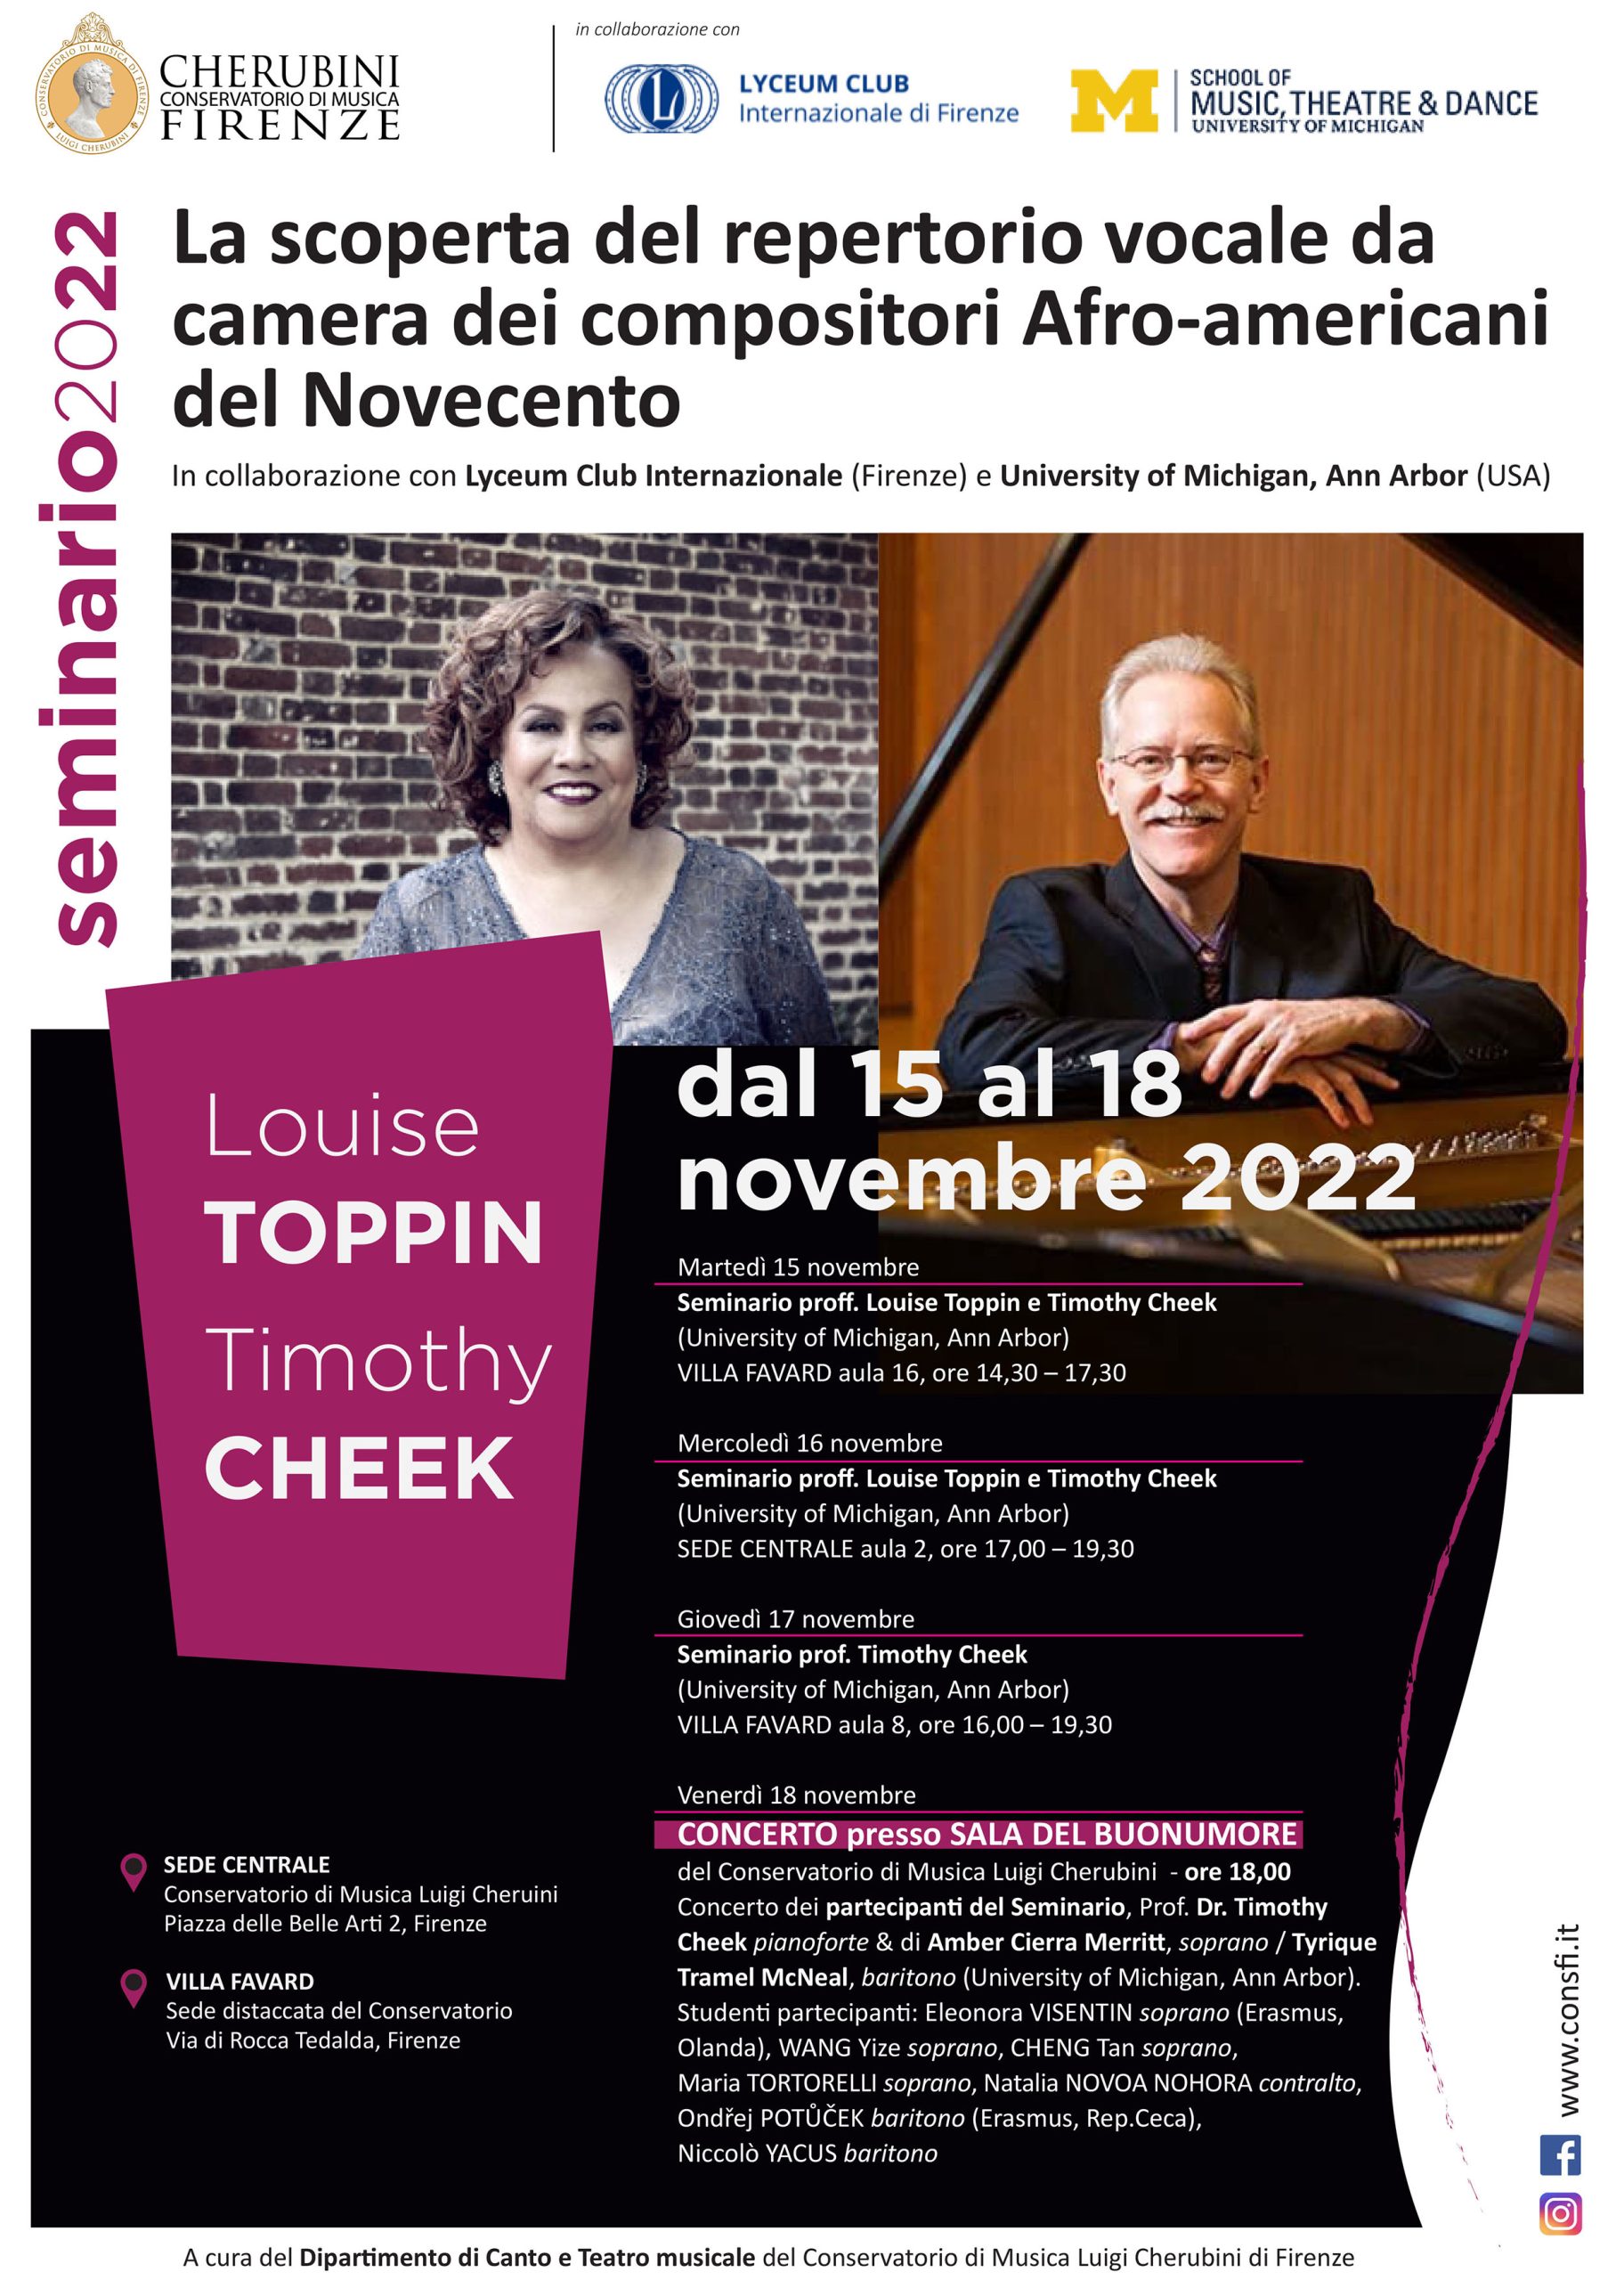 Poster in Italian language featuring Louise Toppin and Tim Cheek